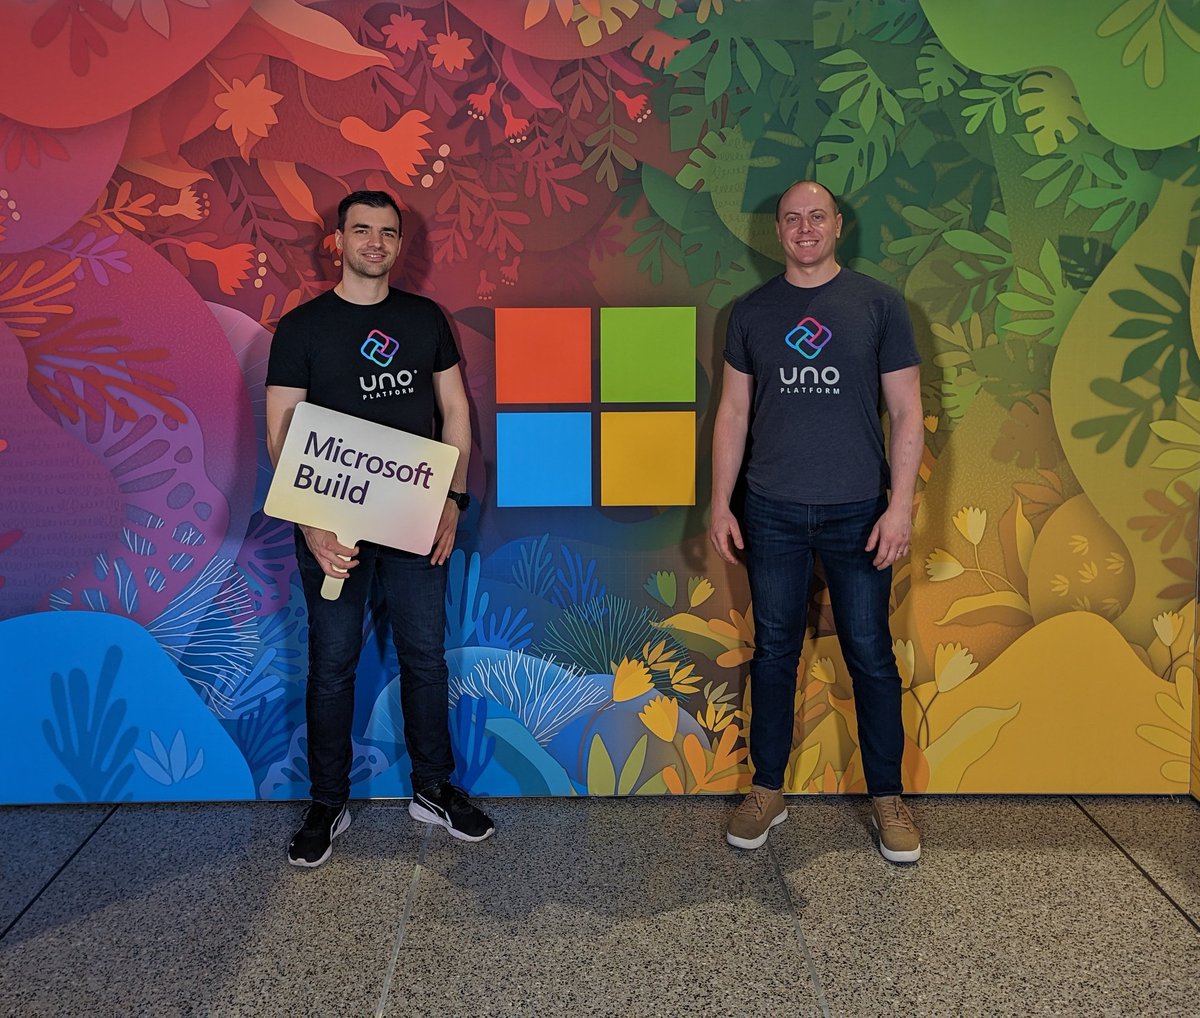 Think these @UnoPlatform shirts are cool? Come find @mzikmunddev and I at #MSBuild! We have a bunch of them to give away! We are ready to kick off our professional modeling careers any day now